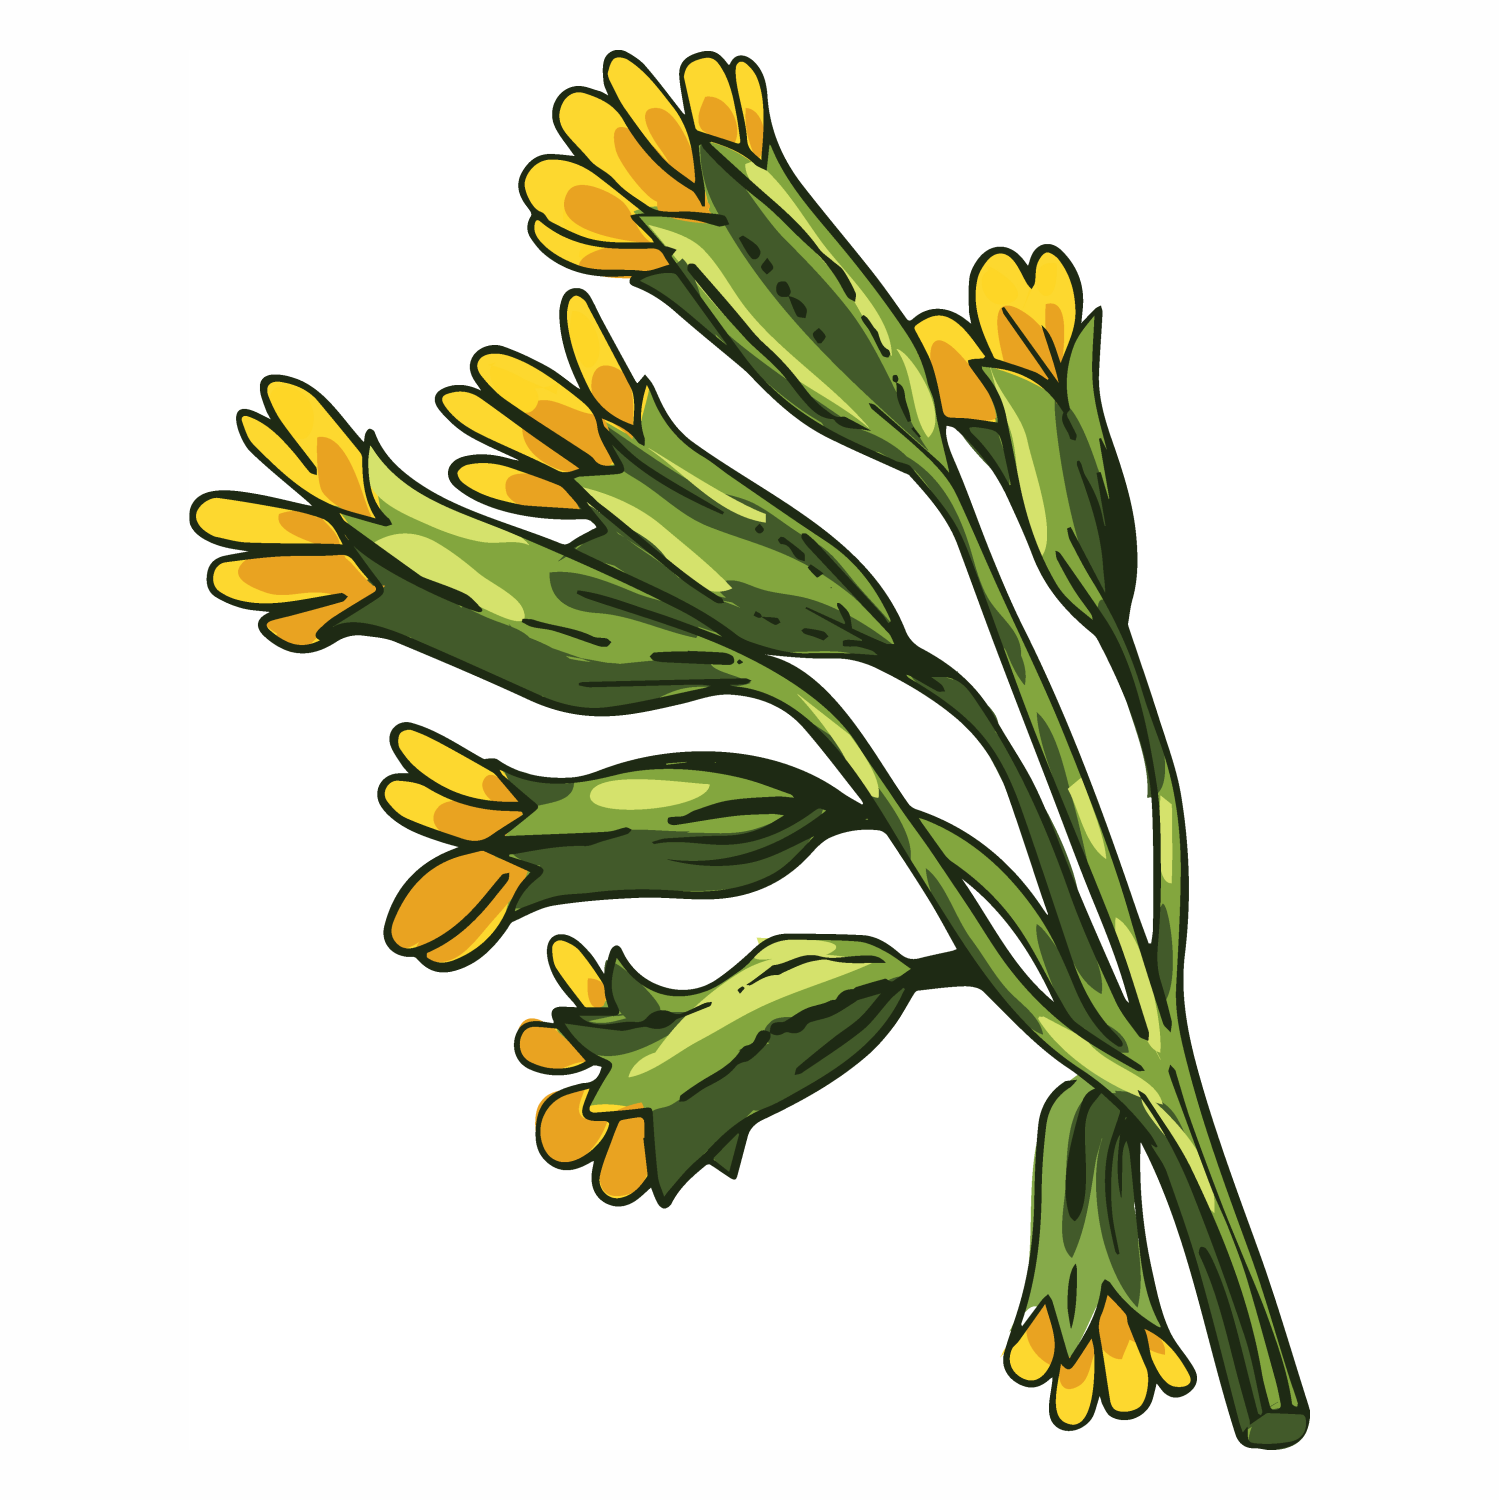 Primula Veris (Cowslip) Extract: Why Primula Veris Extract Brightens Your Skin